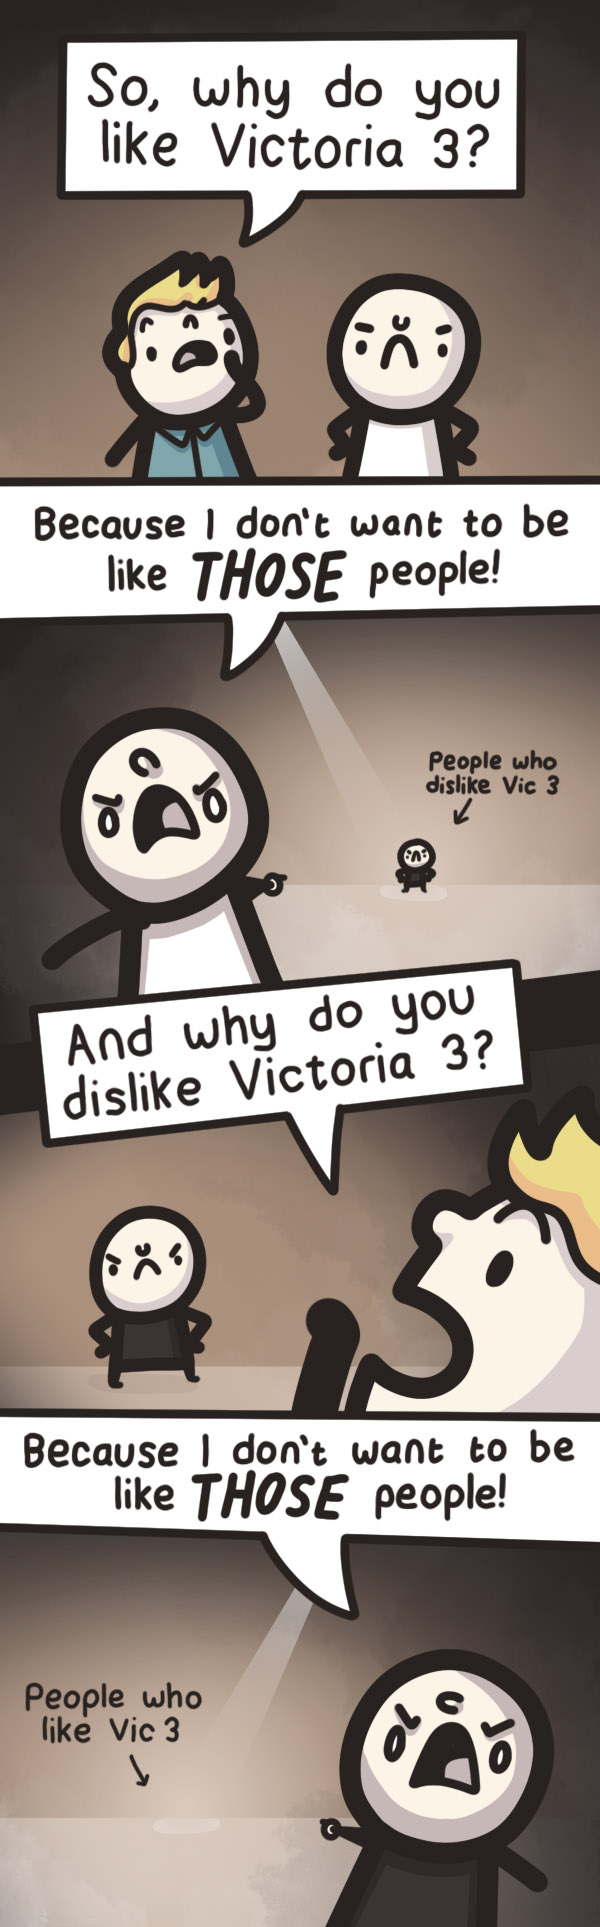 Victoria 3 - A house divided